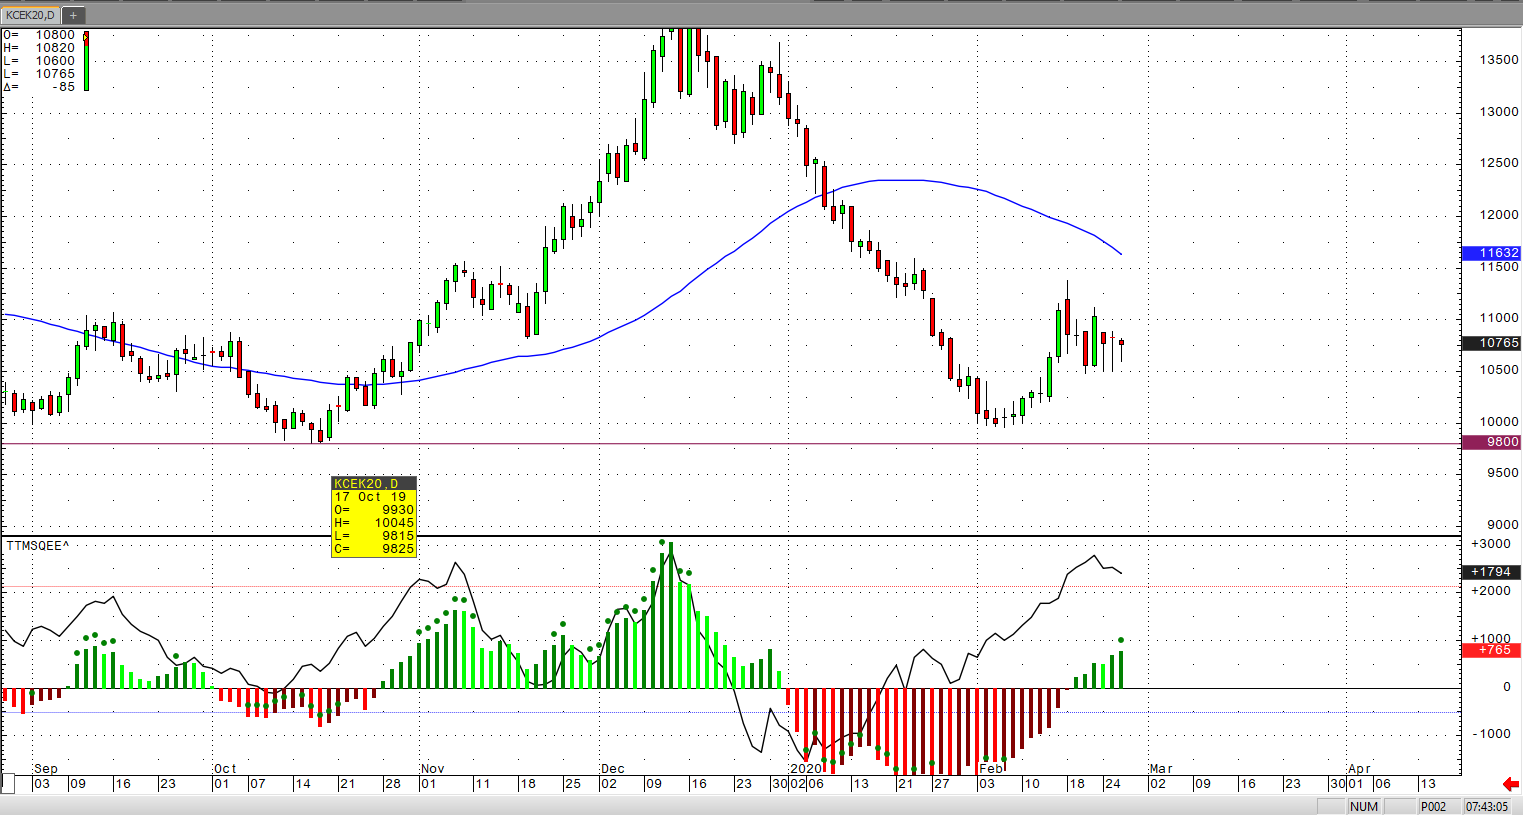 Coffee In Consolidation | RJO Futures